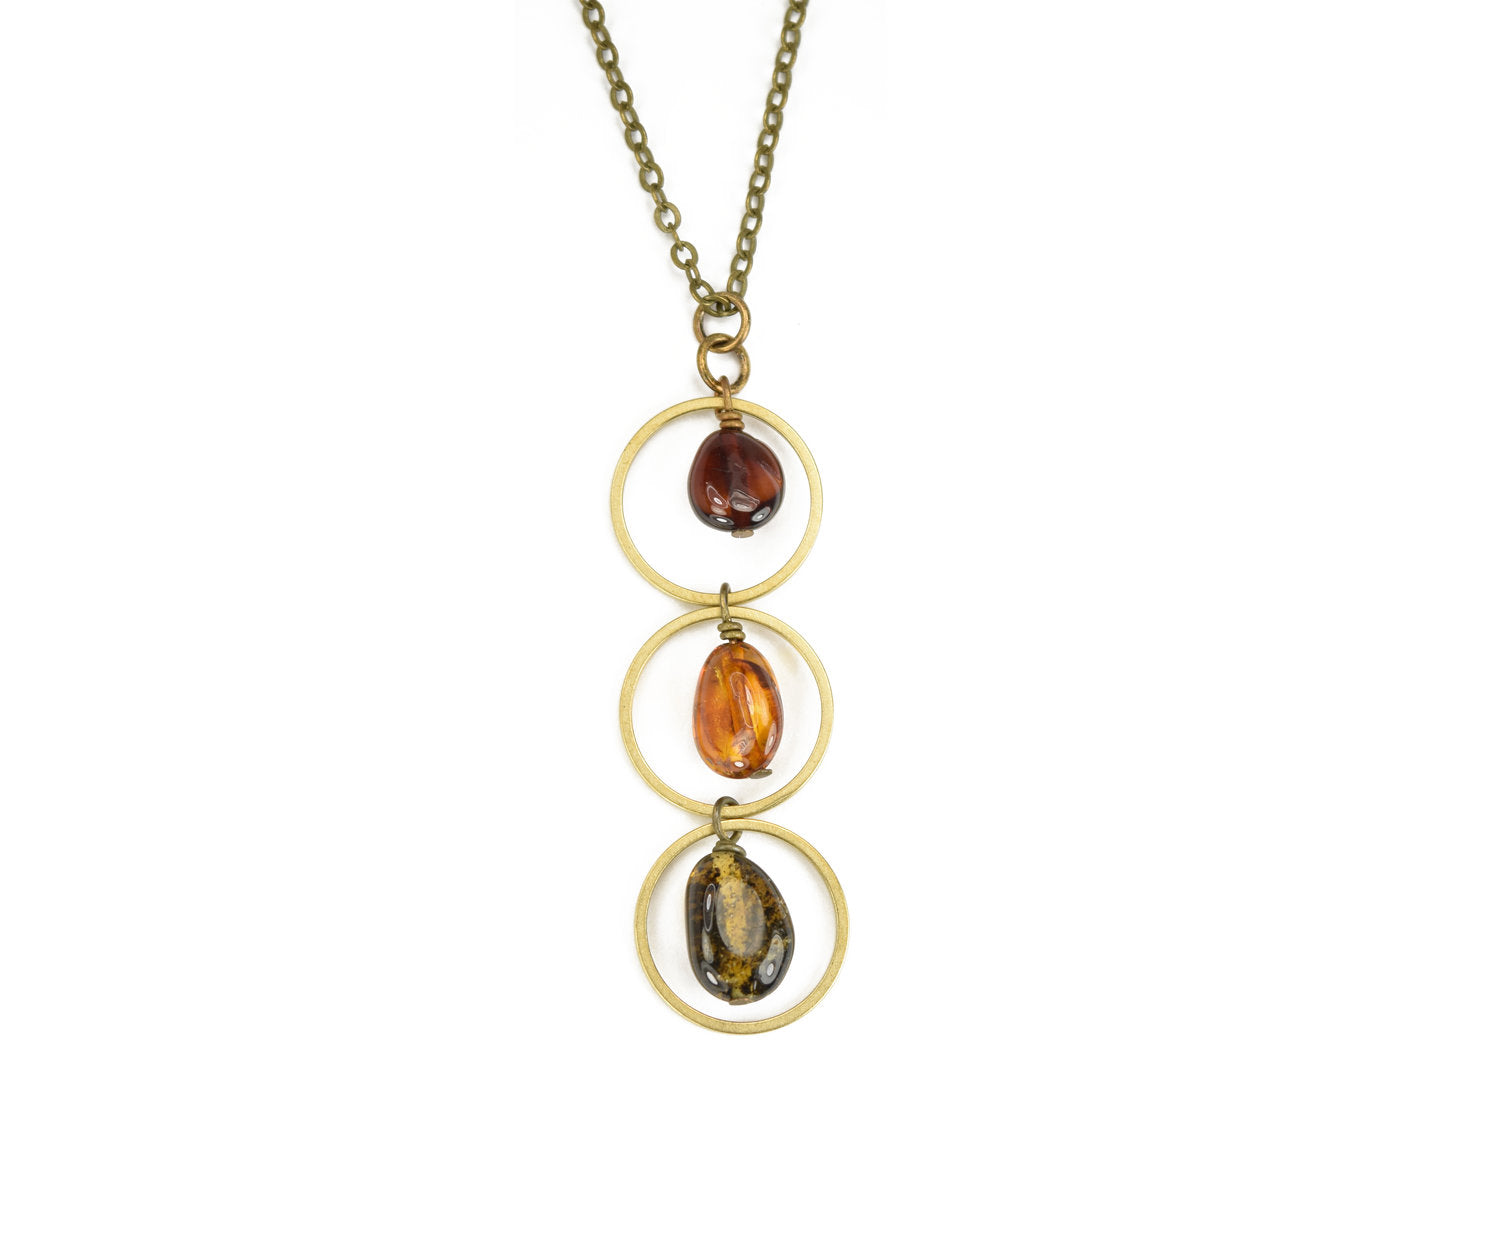 Edgy Petal - Necklace - "Stop Light" - Multi Color Baltic Amber Vertical Circles